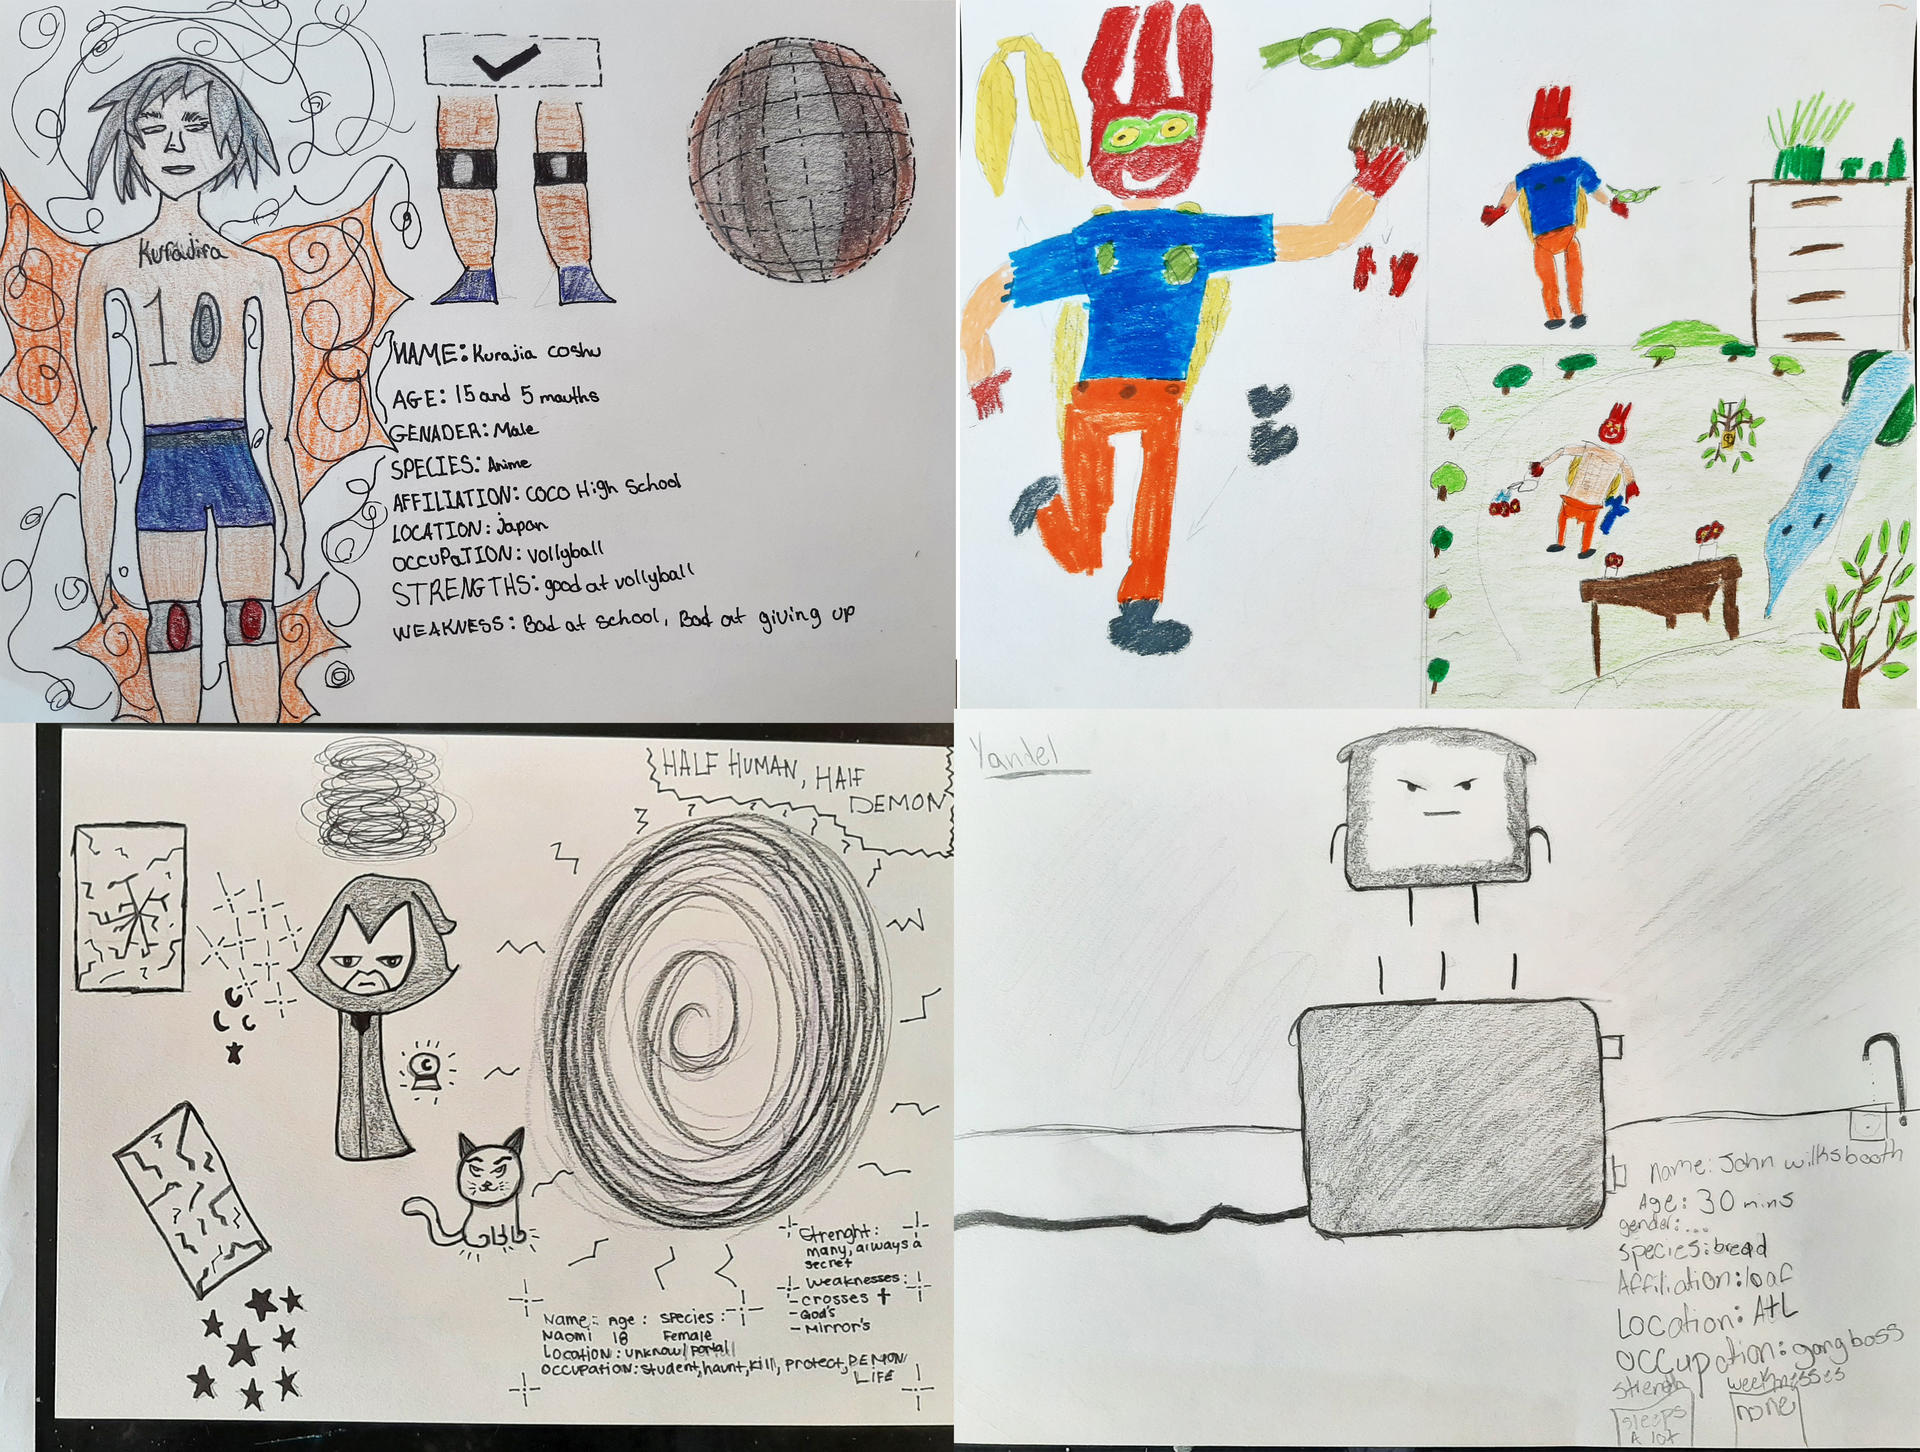 High school students created their own character designs, and created character profiles to put next to their character drawings as well. This lesson was also many student's introduction into anatomy drawing, so while the drawing process became challenging, it was a joy to see them be proud of their own finished art pieces.